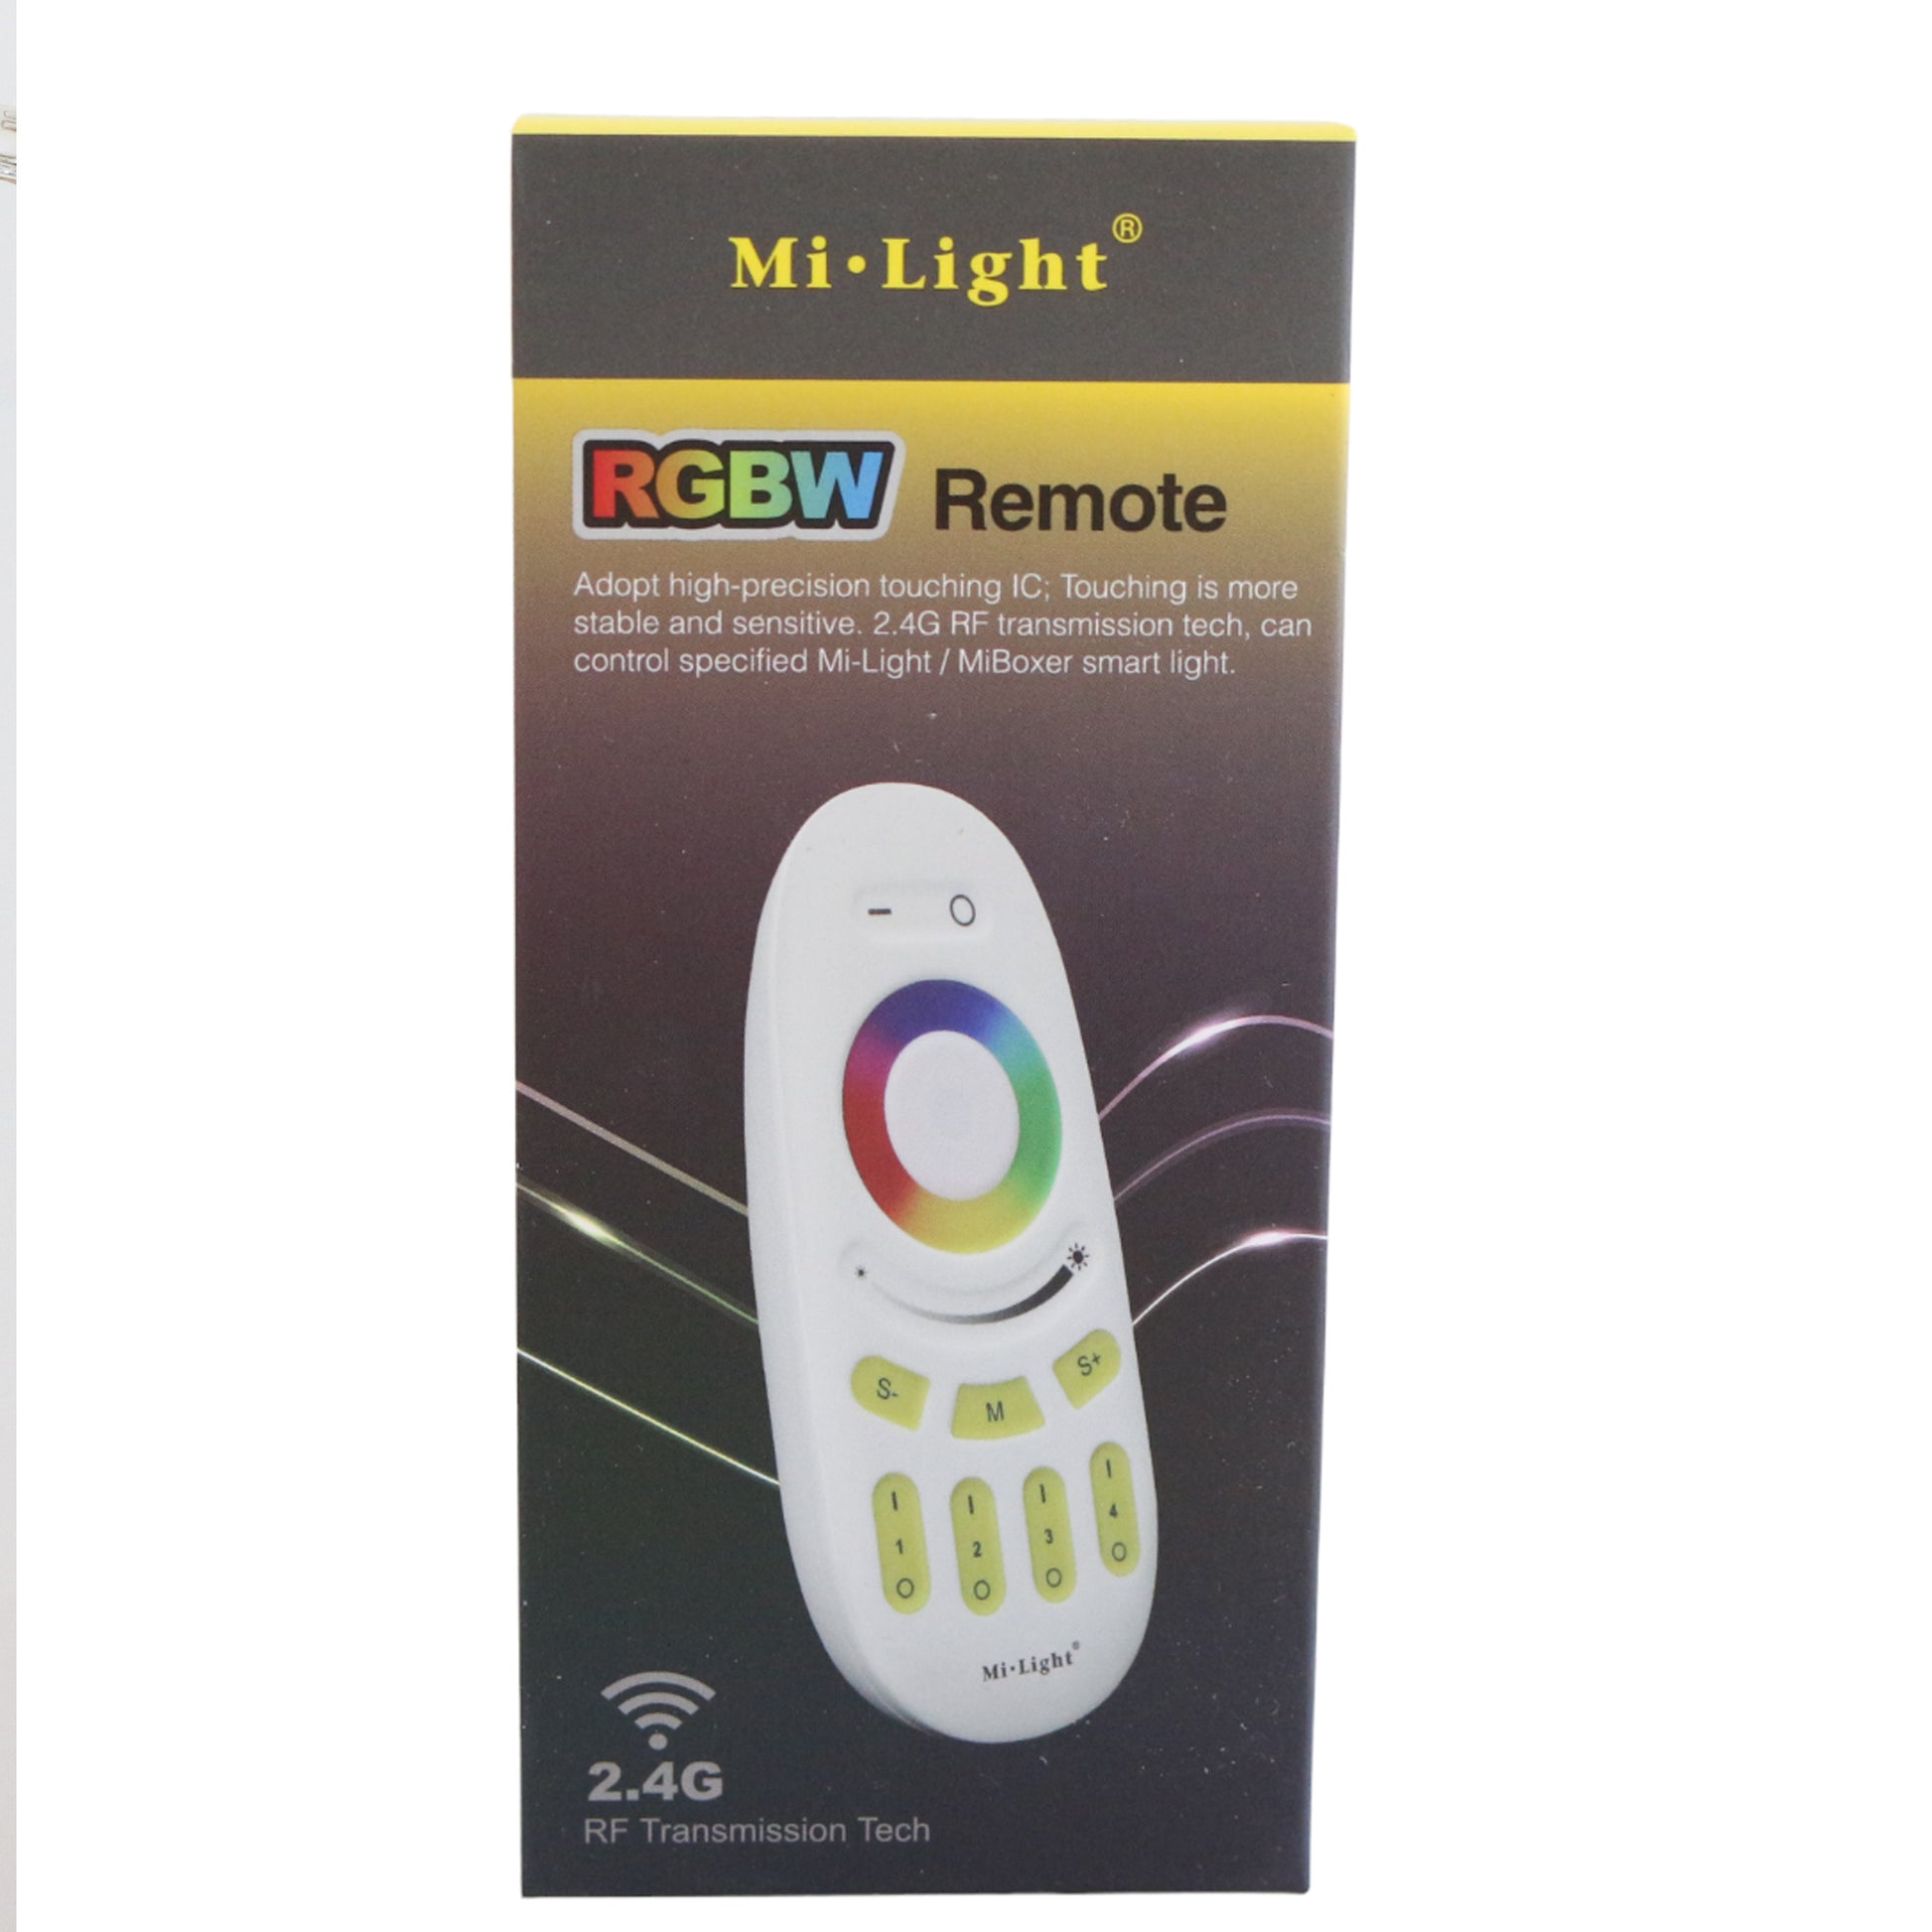 Controller and Remote for RGB LED Strip Light 